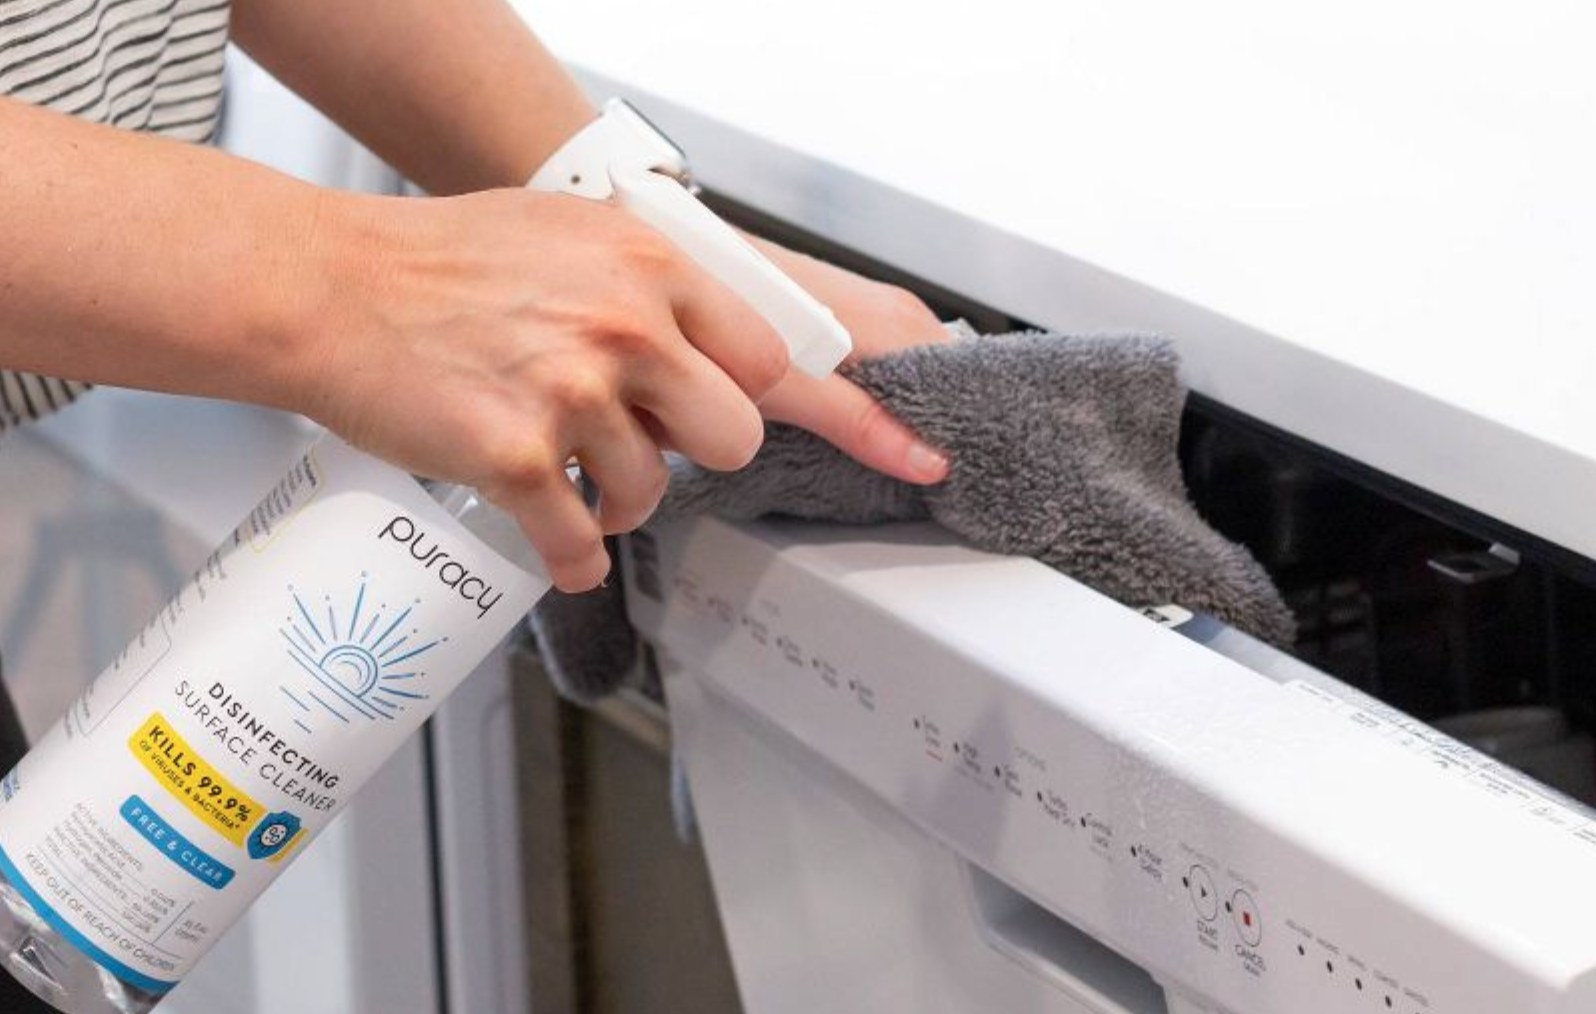 a model using the white spray bottle on a white dishwasher